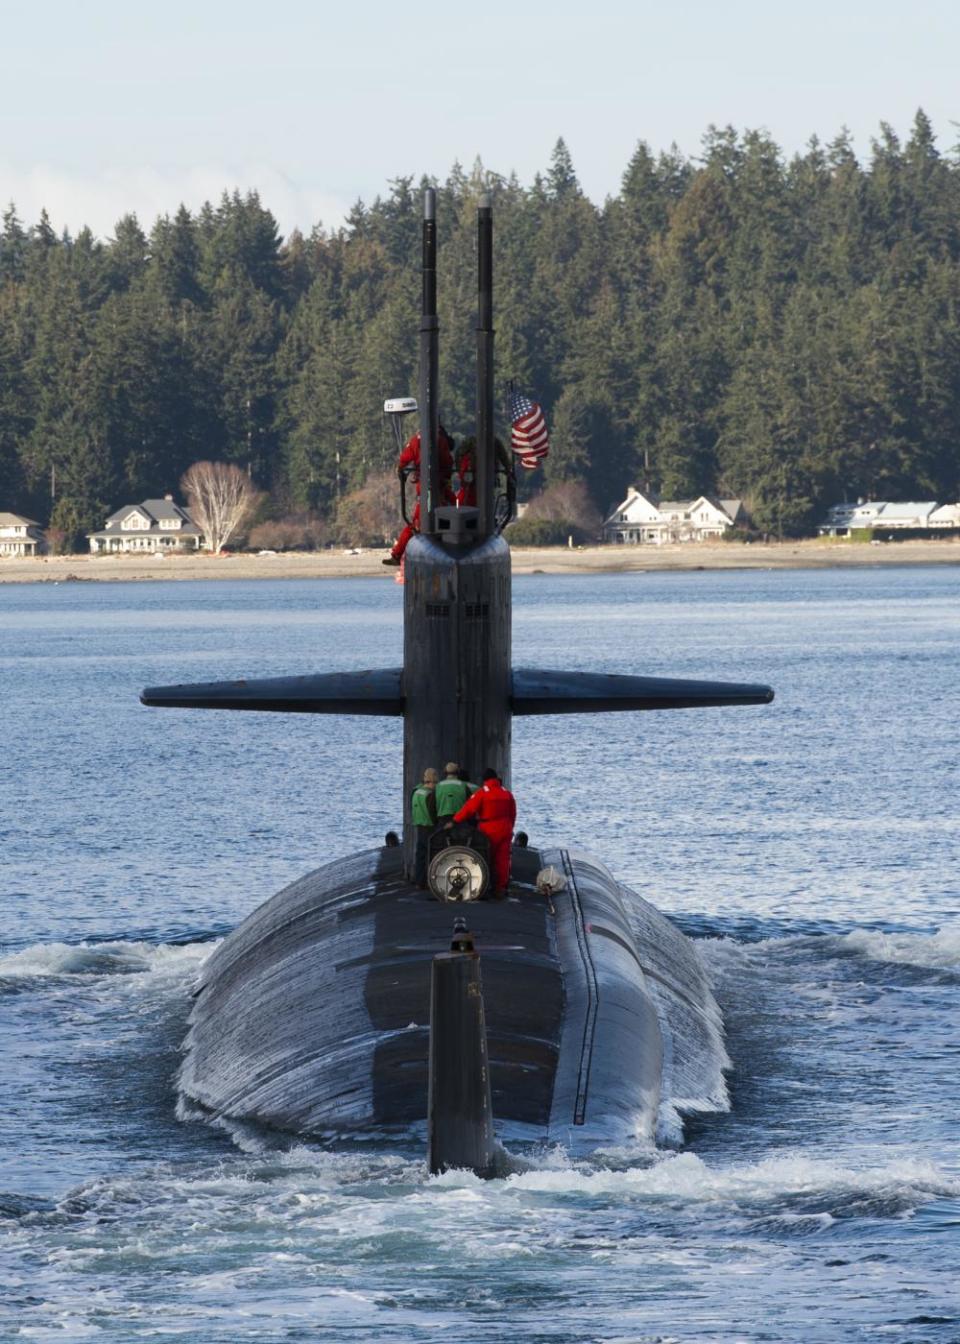 The Los Angeles-class fast-attack submarine USS Key West (SSN 722) transits the Puget Sound before mooring at Bremerton on Feb. 10.